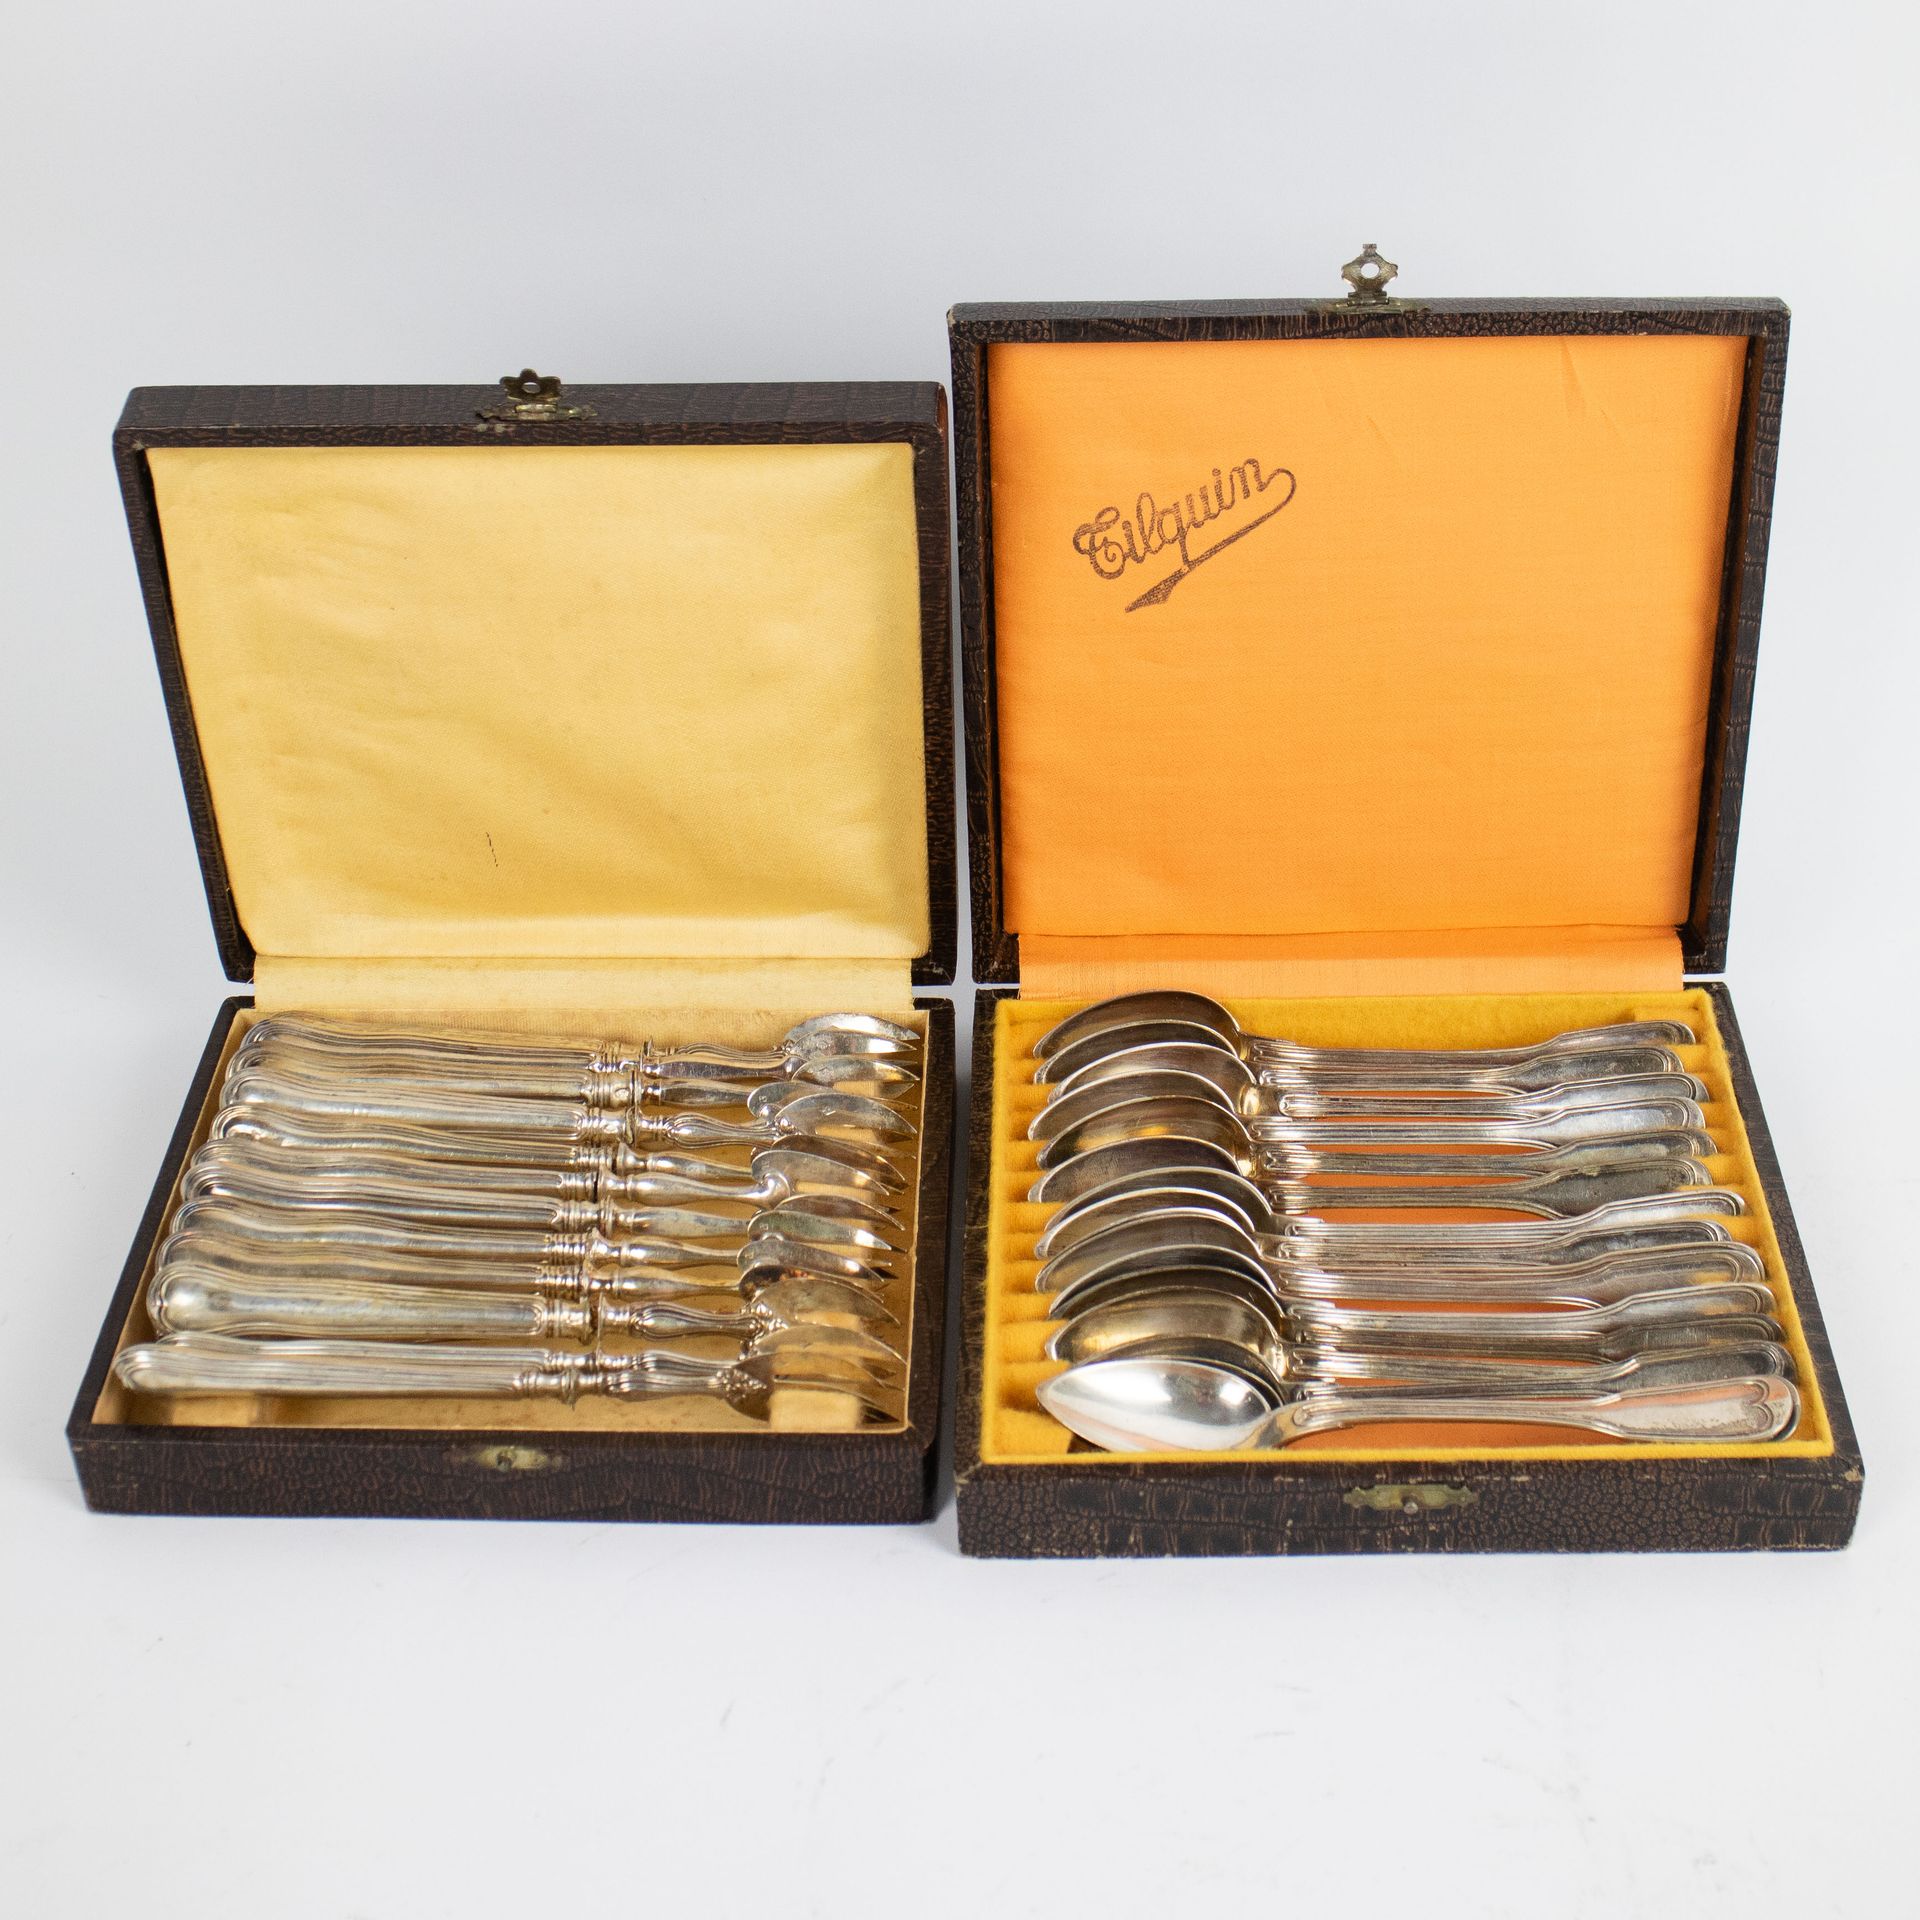 14 forks and 16 spoons Tilquin and a silvered tray with 6 colored glasses 银800，有&hellip;